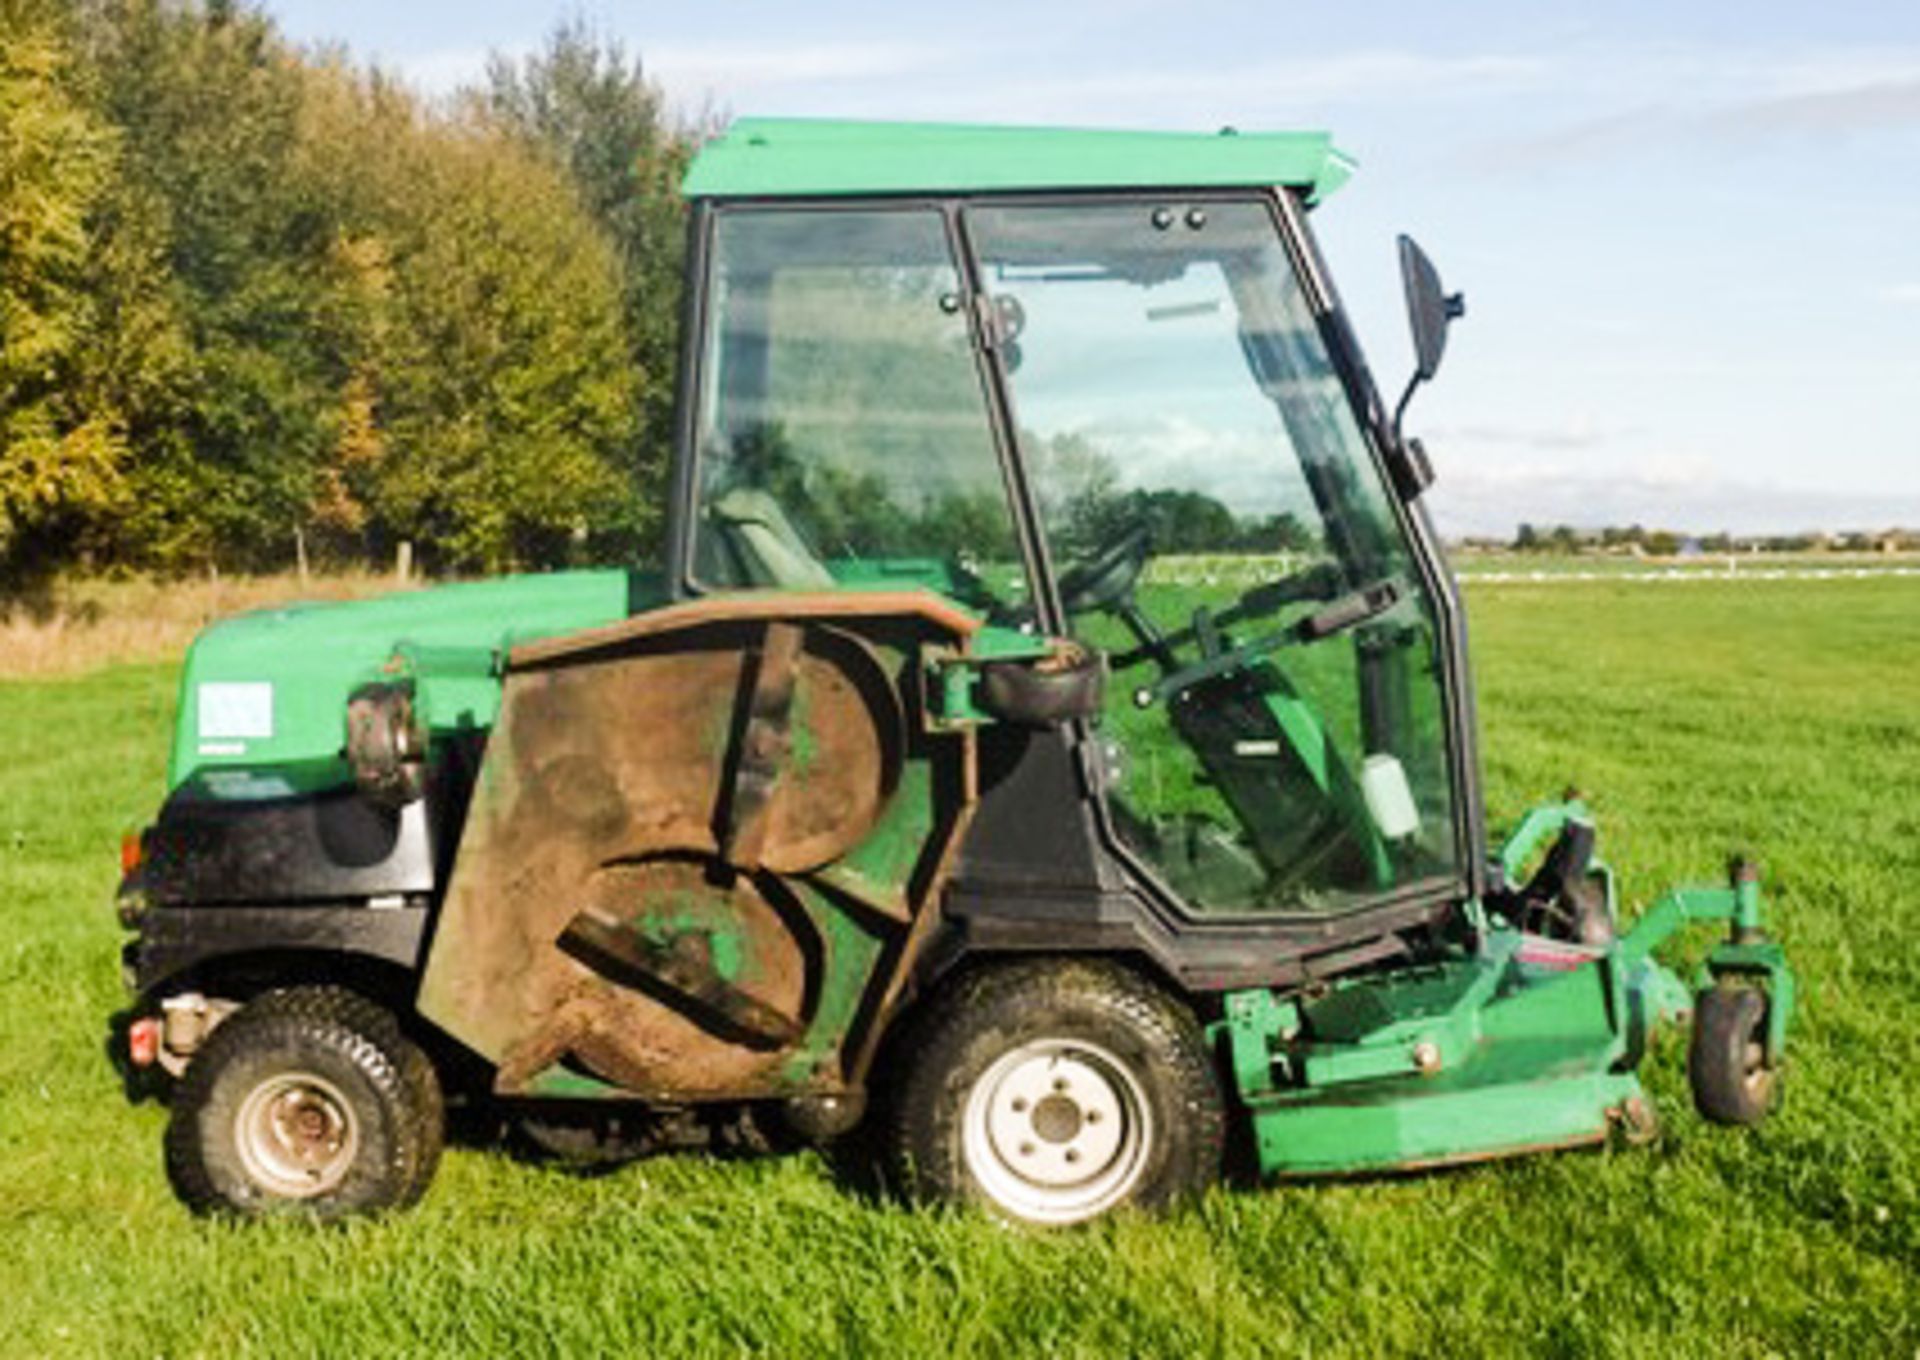 2006 RANSOME HF6010 BATWING ROTARY MOWER, CUTS APPROX 10FT 6INCHS, PERKINS 6 CYLINDER ENGINE, REG KX - Image 9 of 14